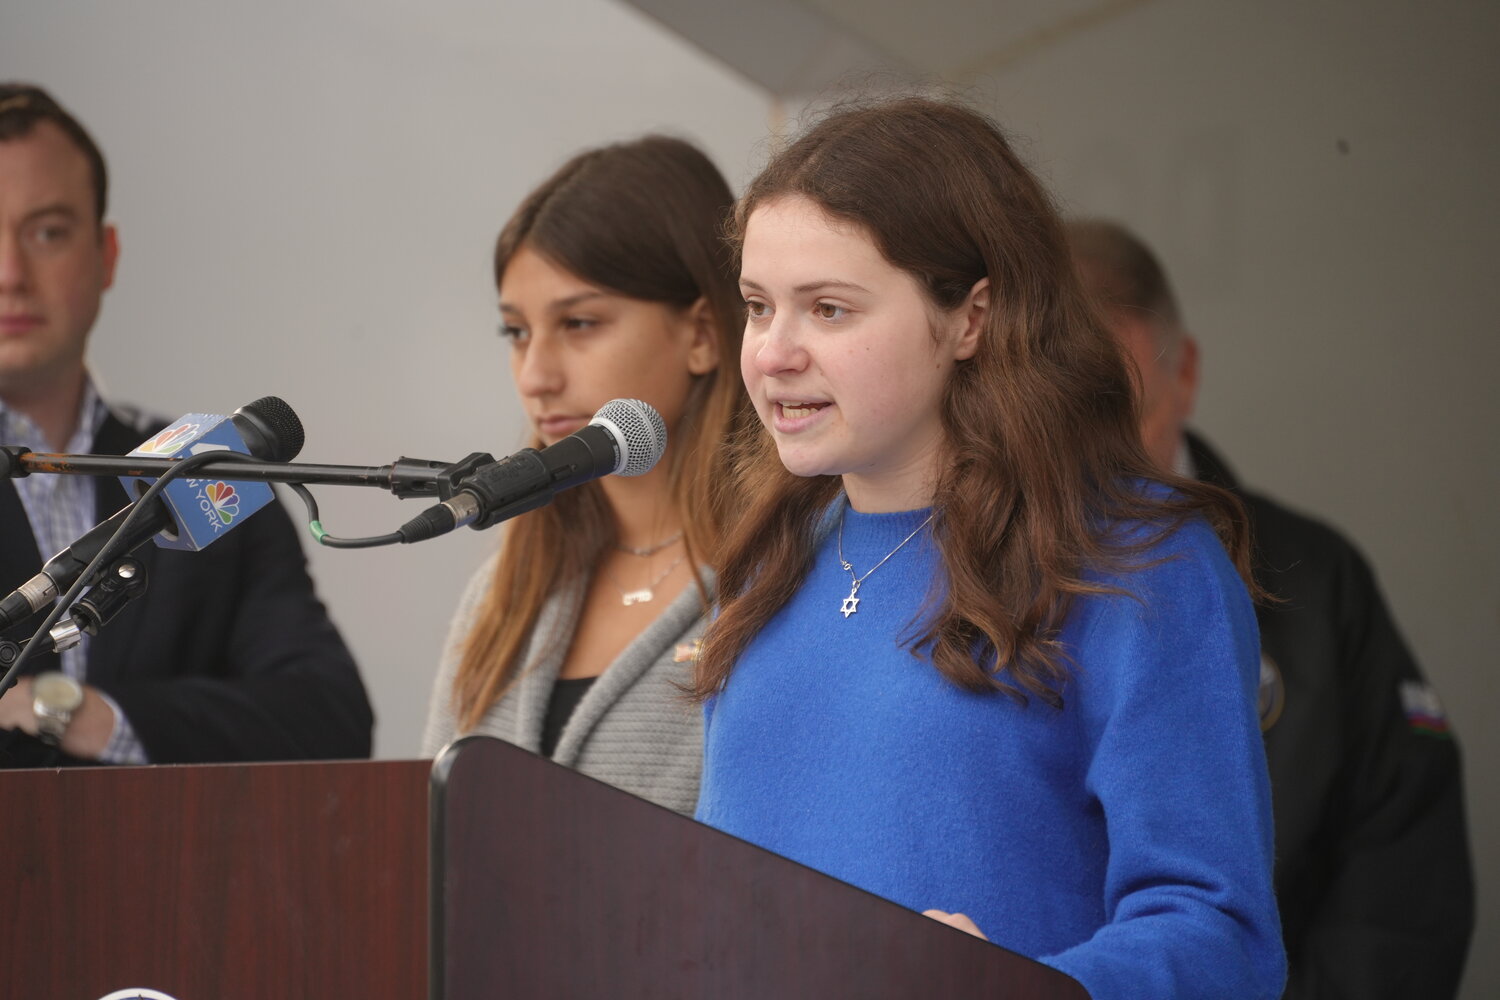 Sofie Glassman, a student at East Meadow High School, encouraged those in the crowd to find their voice and help foster change.